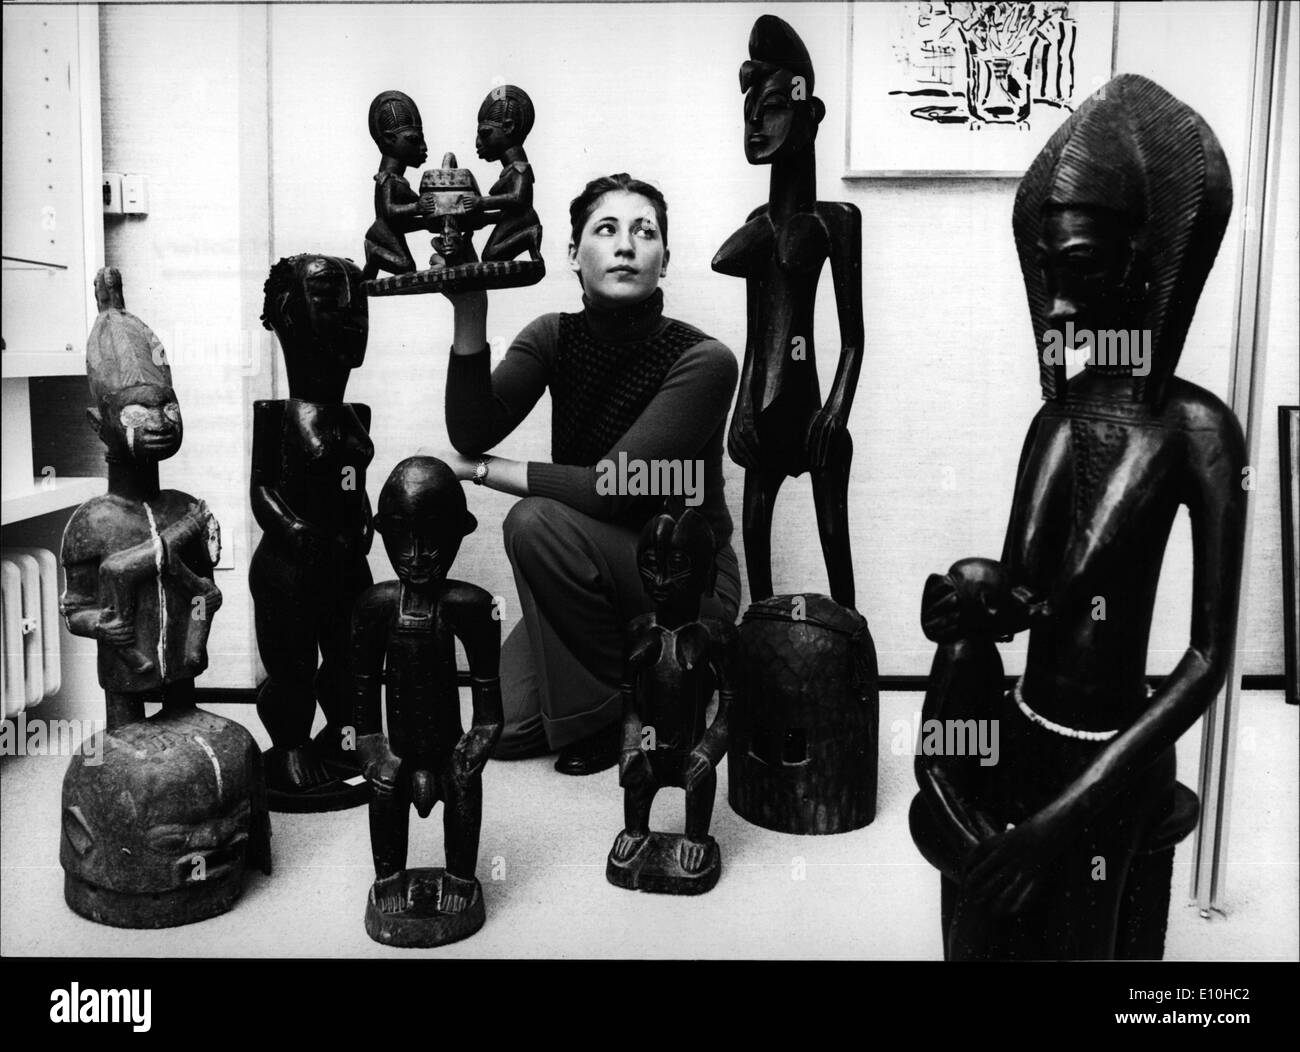 Feb. 02, 1973 - Traditional African Art Exhibited In A D&uuml;sseldorf Gallery Cornella sits among some of the sculptures which Stock Photo